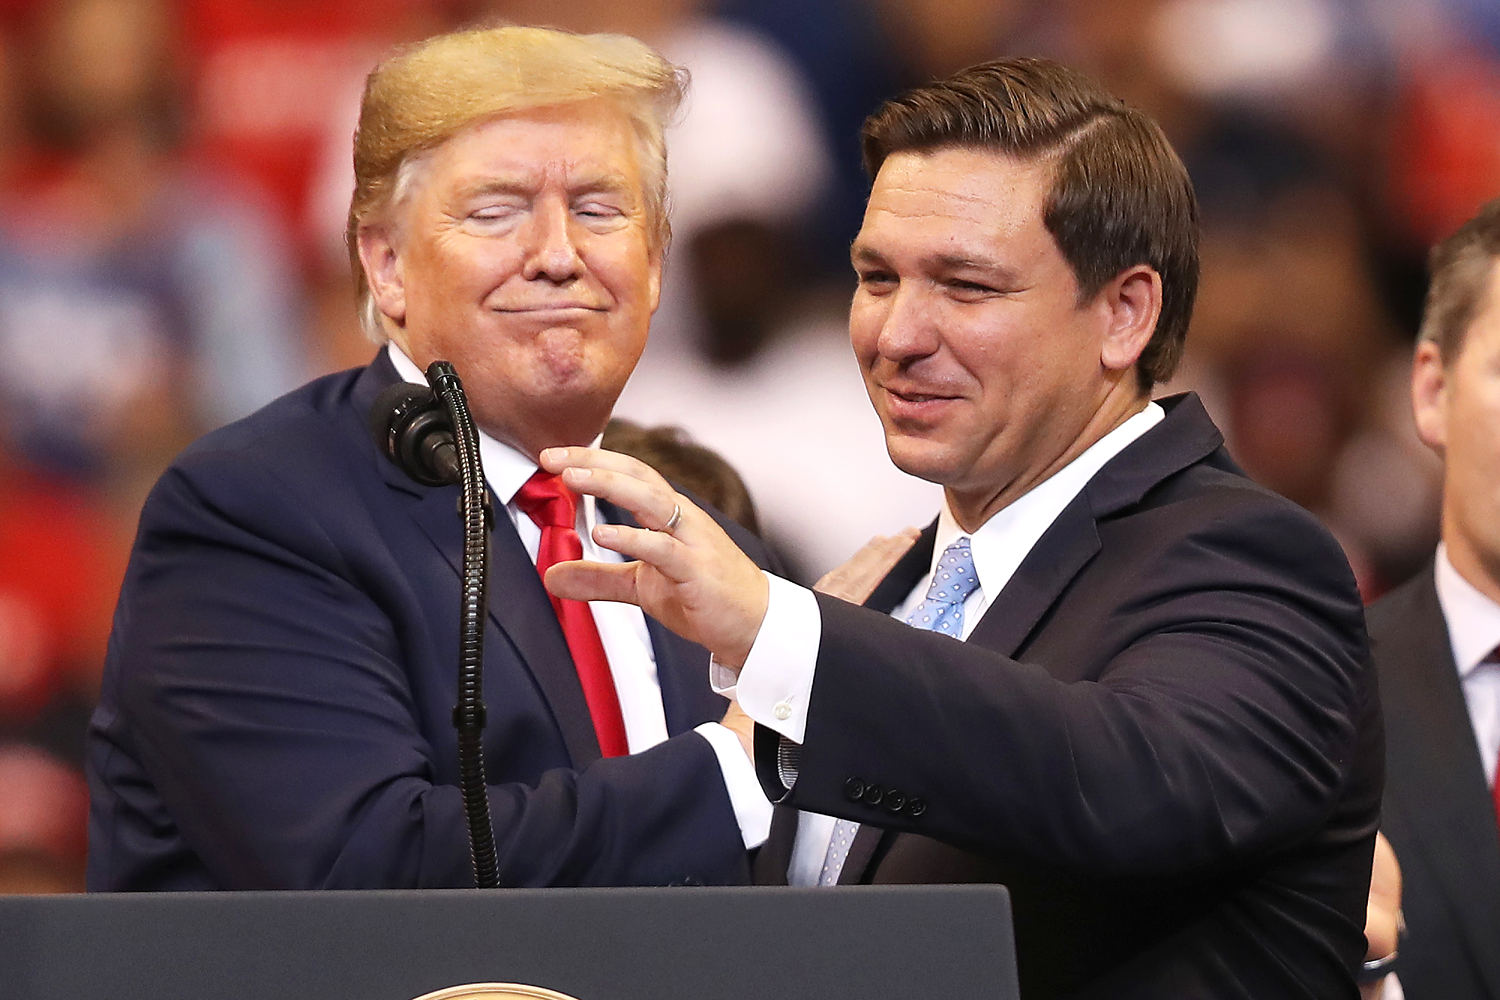 Ron DeSantis hopes to raise at least $10M to boost Trump